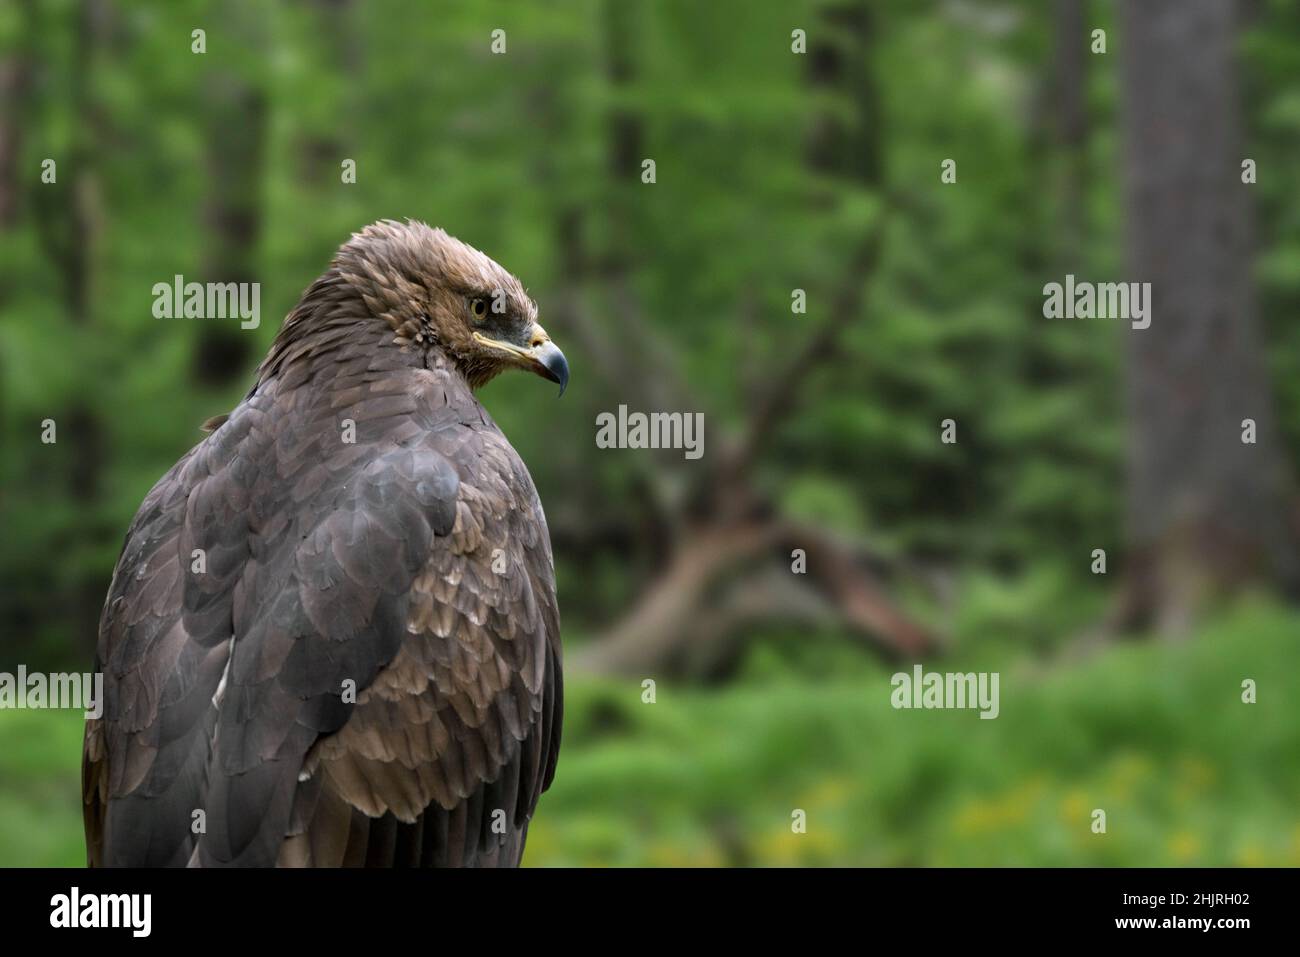 Lesser spotted eagle (Clanga pomarina) close-up portrait in forest Stock Photo